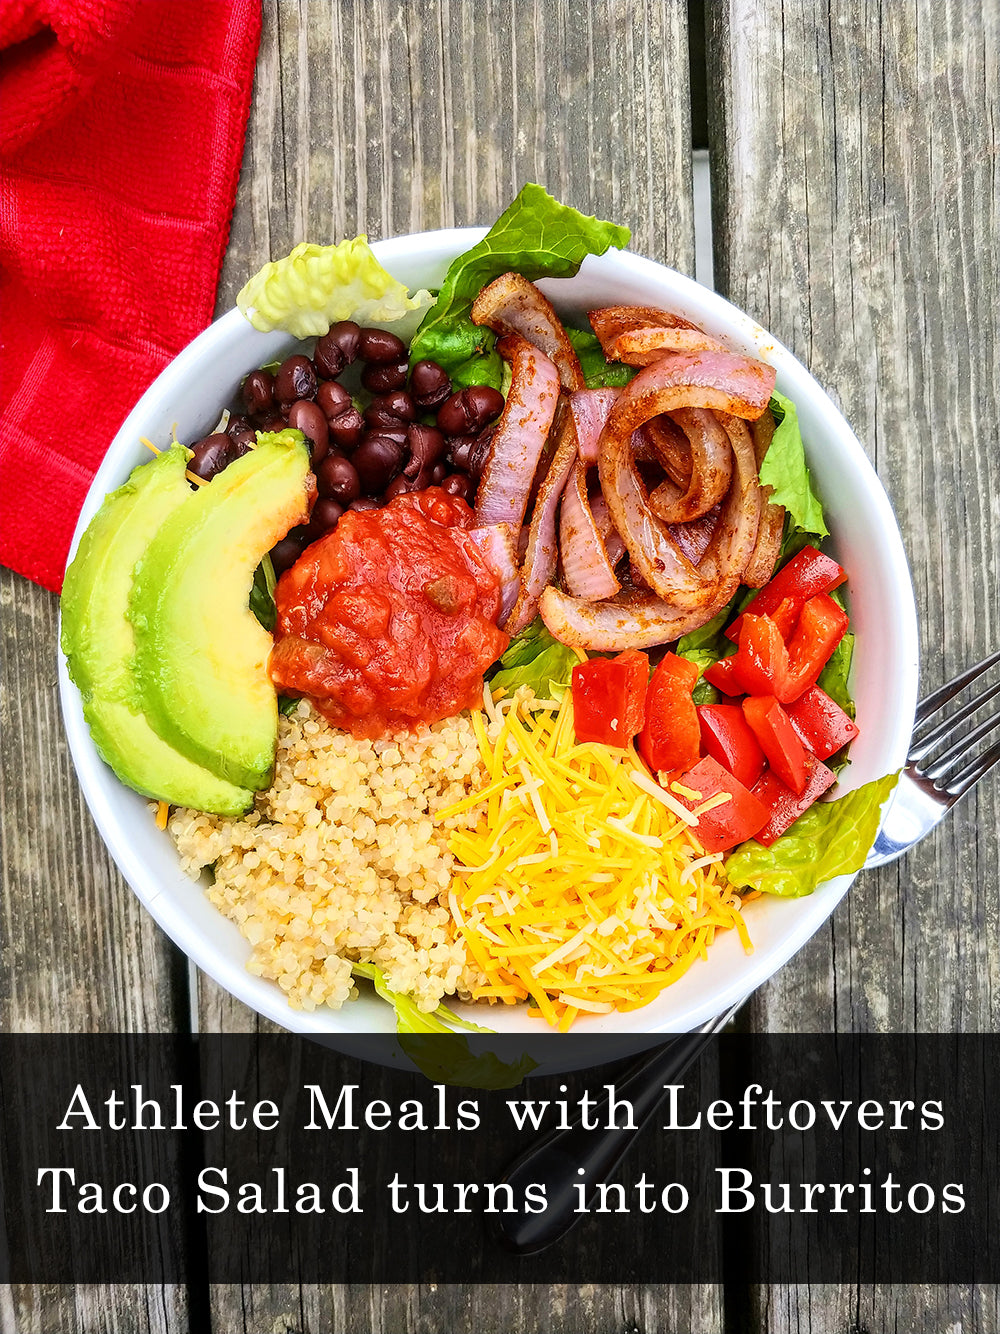 Athlete Meals with Leftovers - Taco Salad with Burrito Leftovers